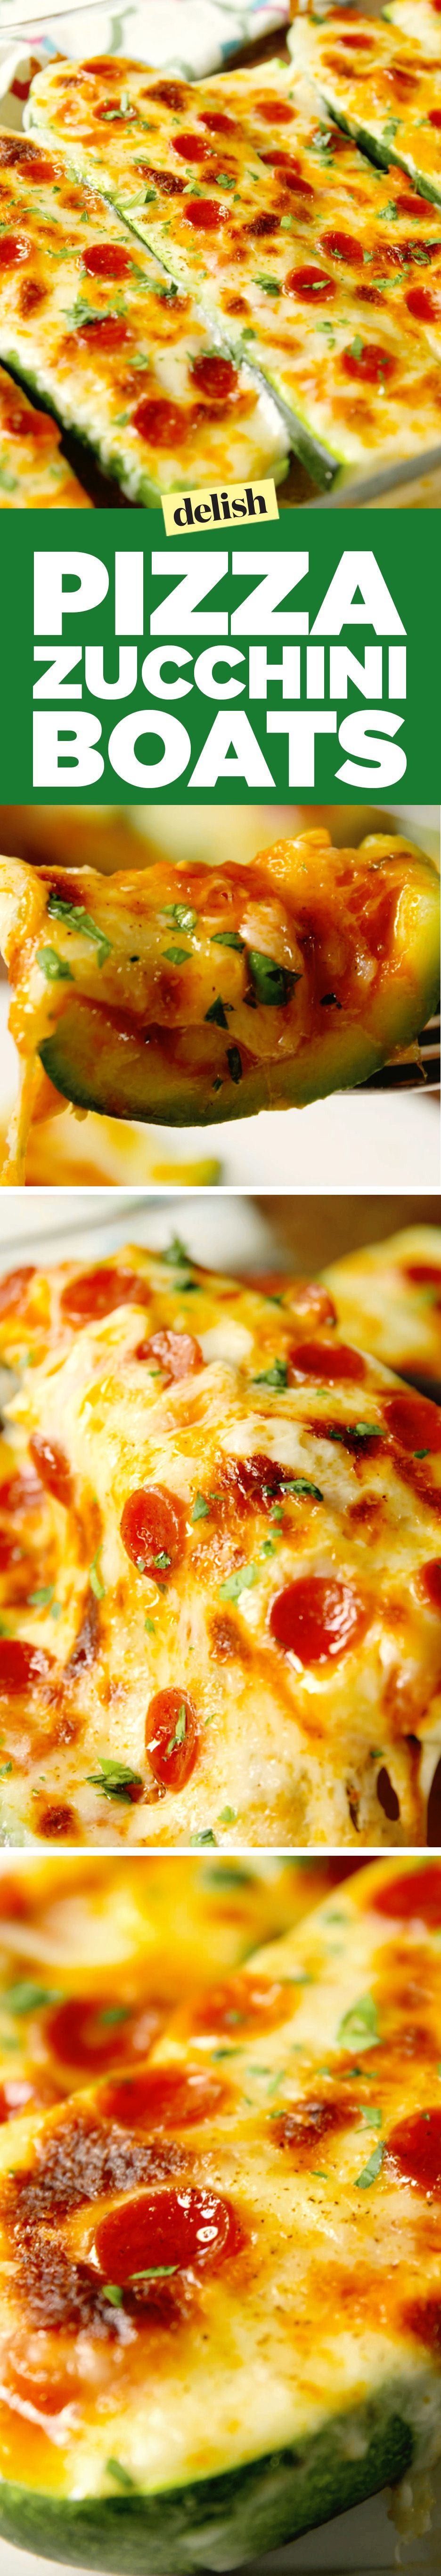 Pizza zucchini boats are the healthiest way to eat pizza. Get the recipe on Delish.com.